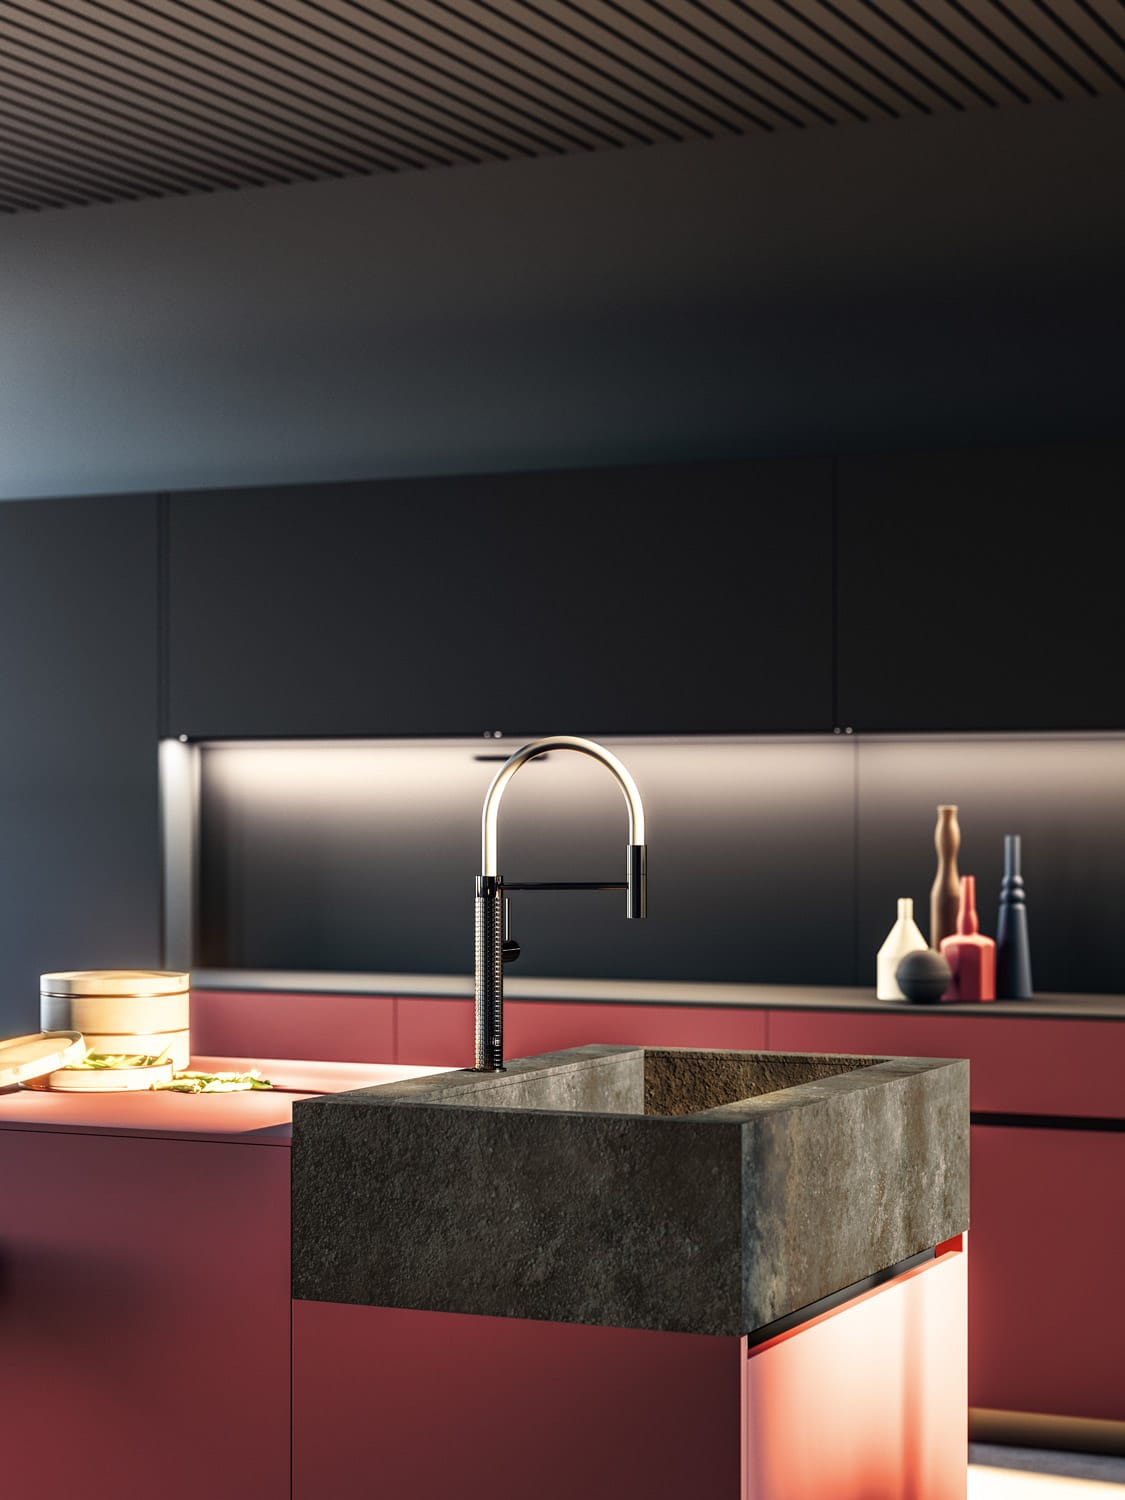 The stoneware sink on the island gives this Tau kitchen an extra contemporary touch, creating a contrast of textures with the smooth Fenix finish of the cabinets.